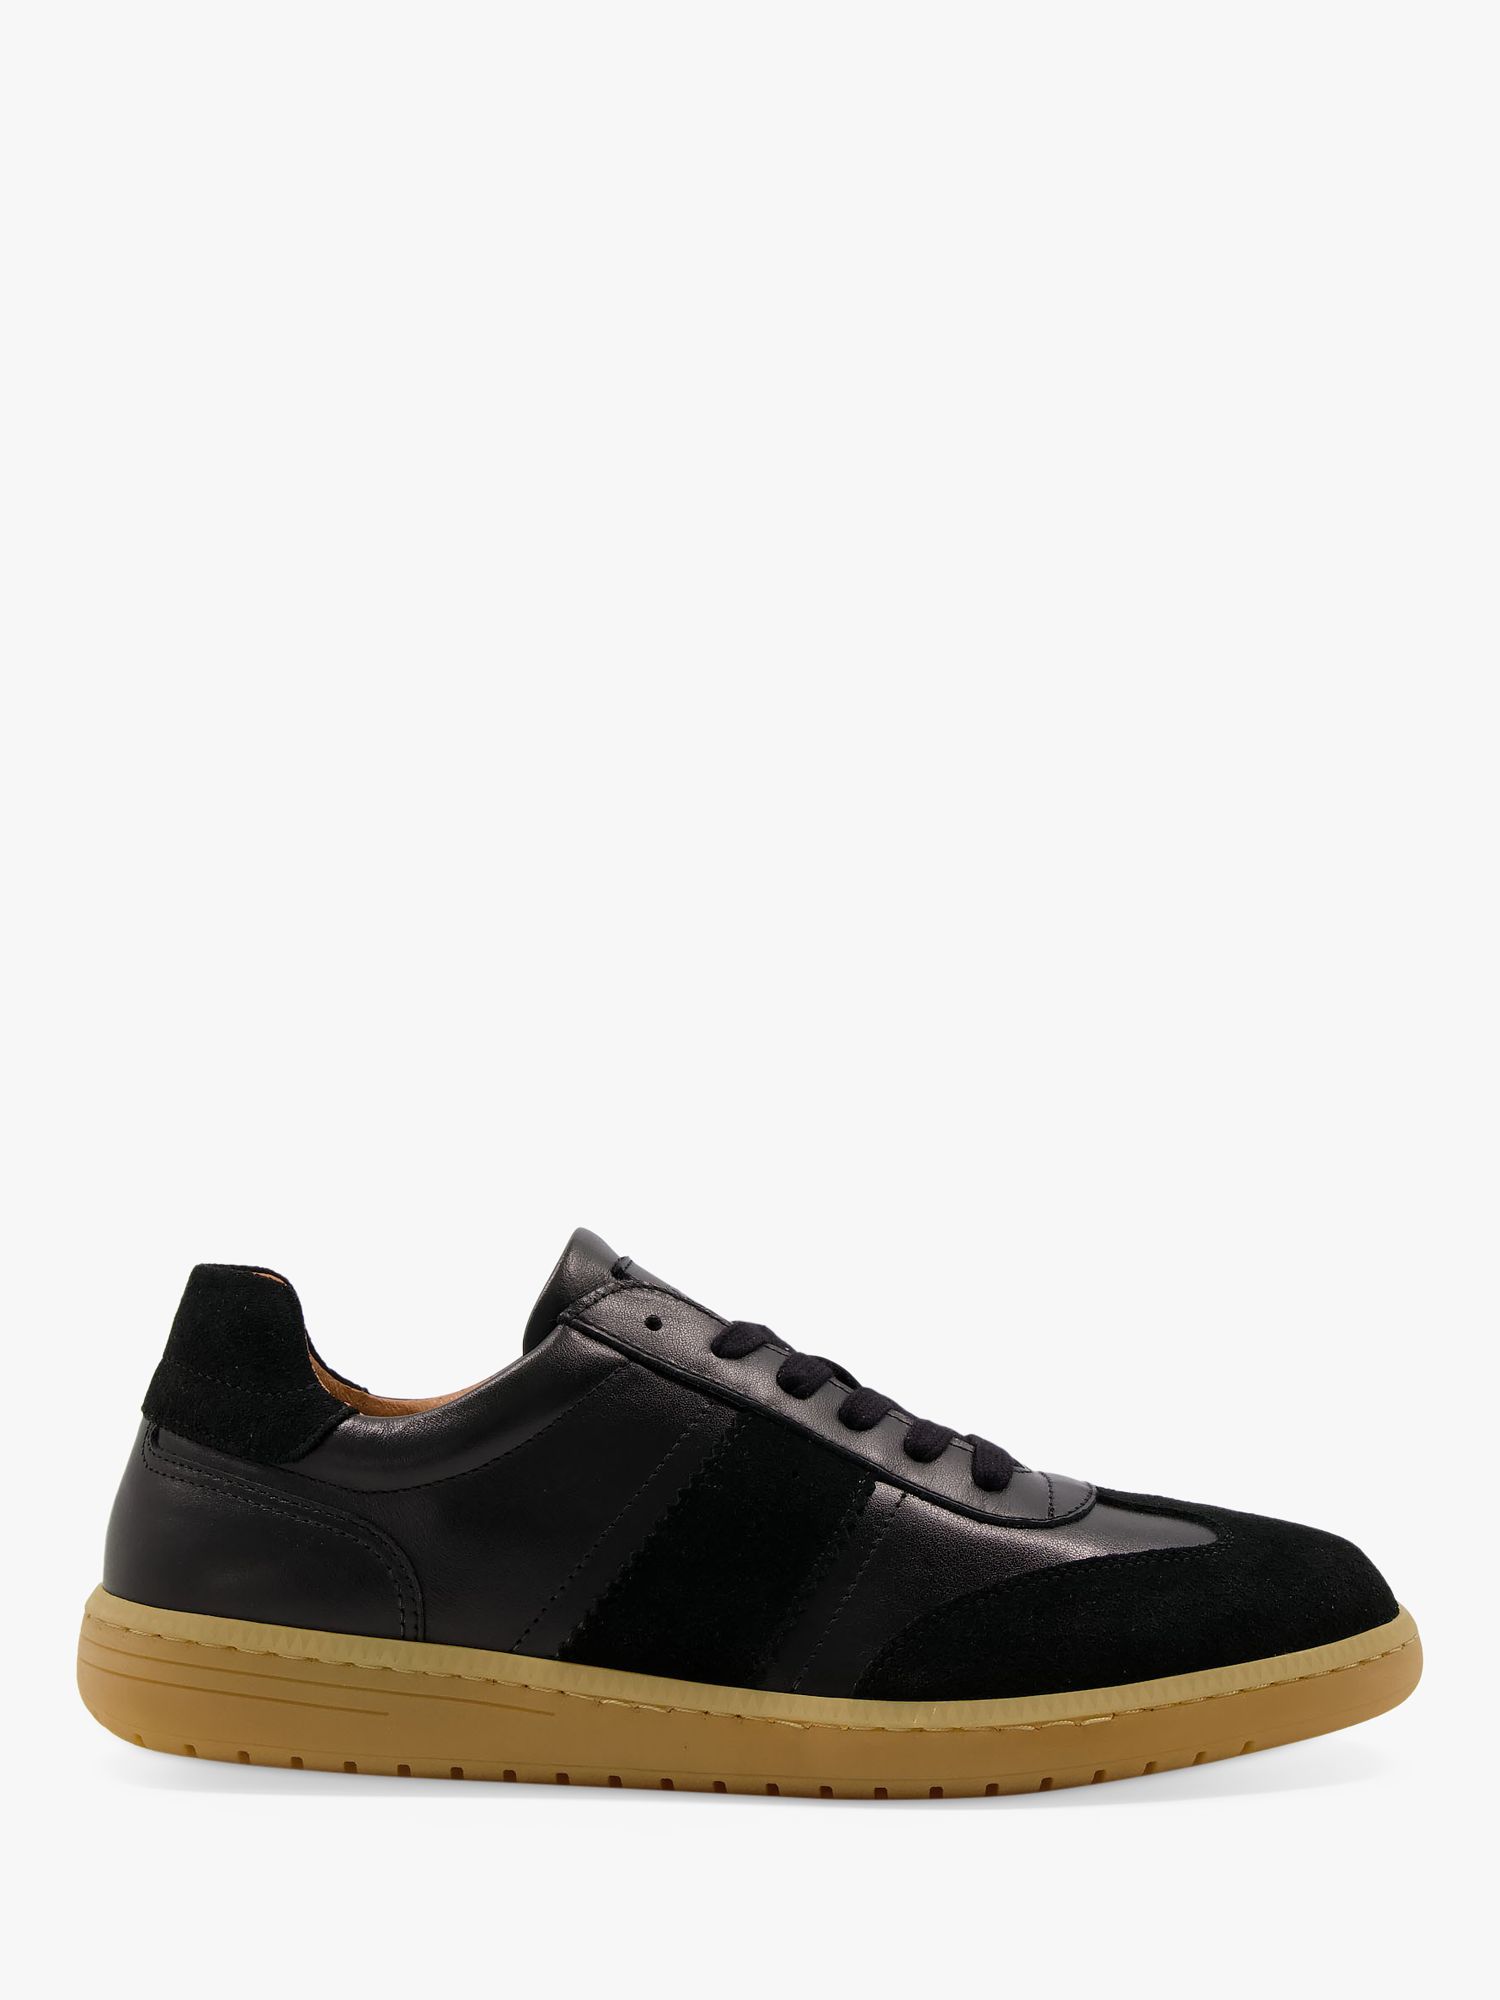 Dune Tumble Leather Lace Up Trainers